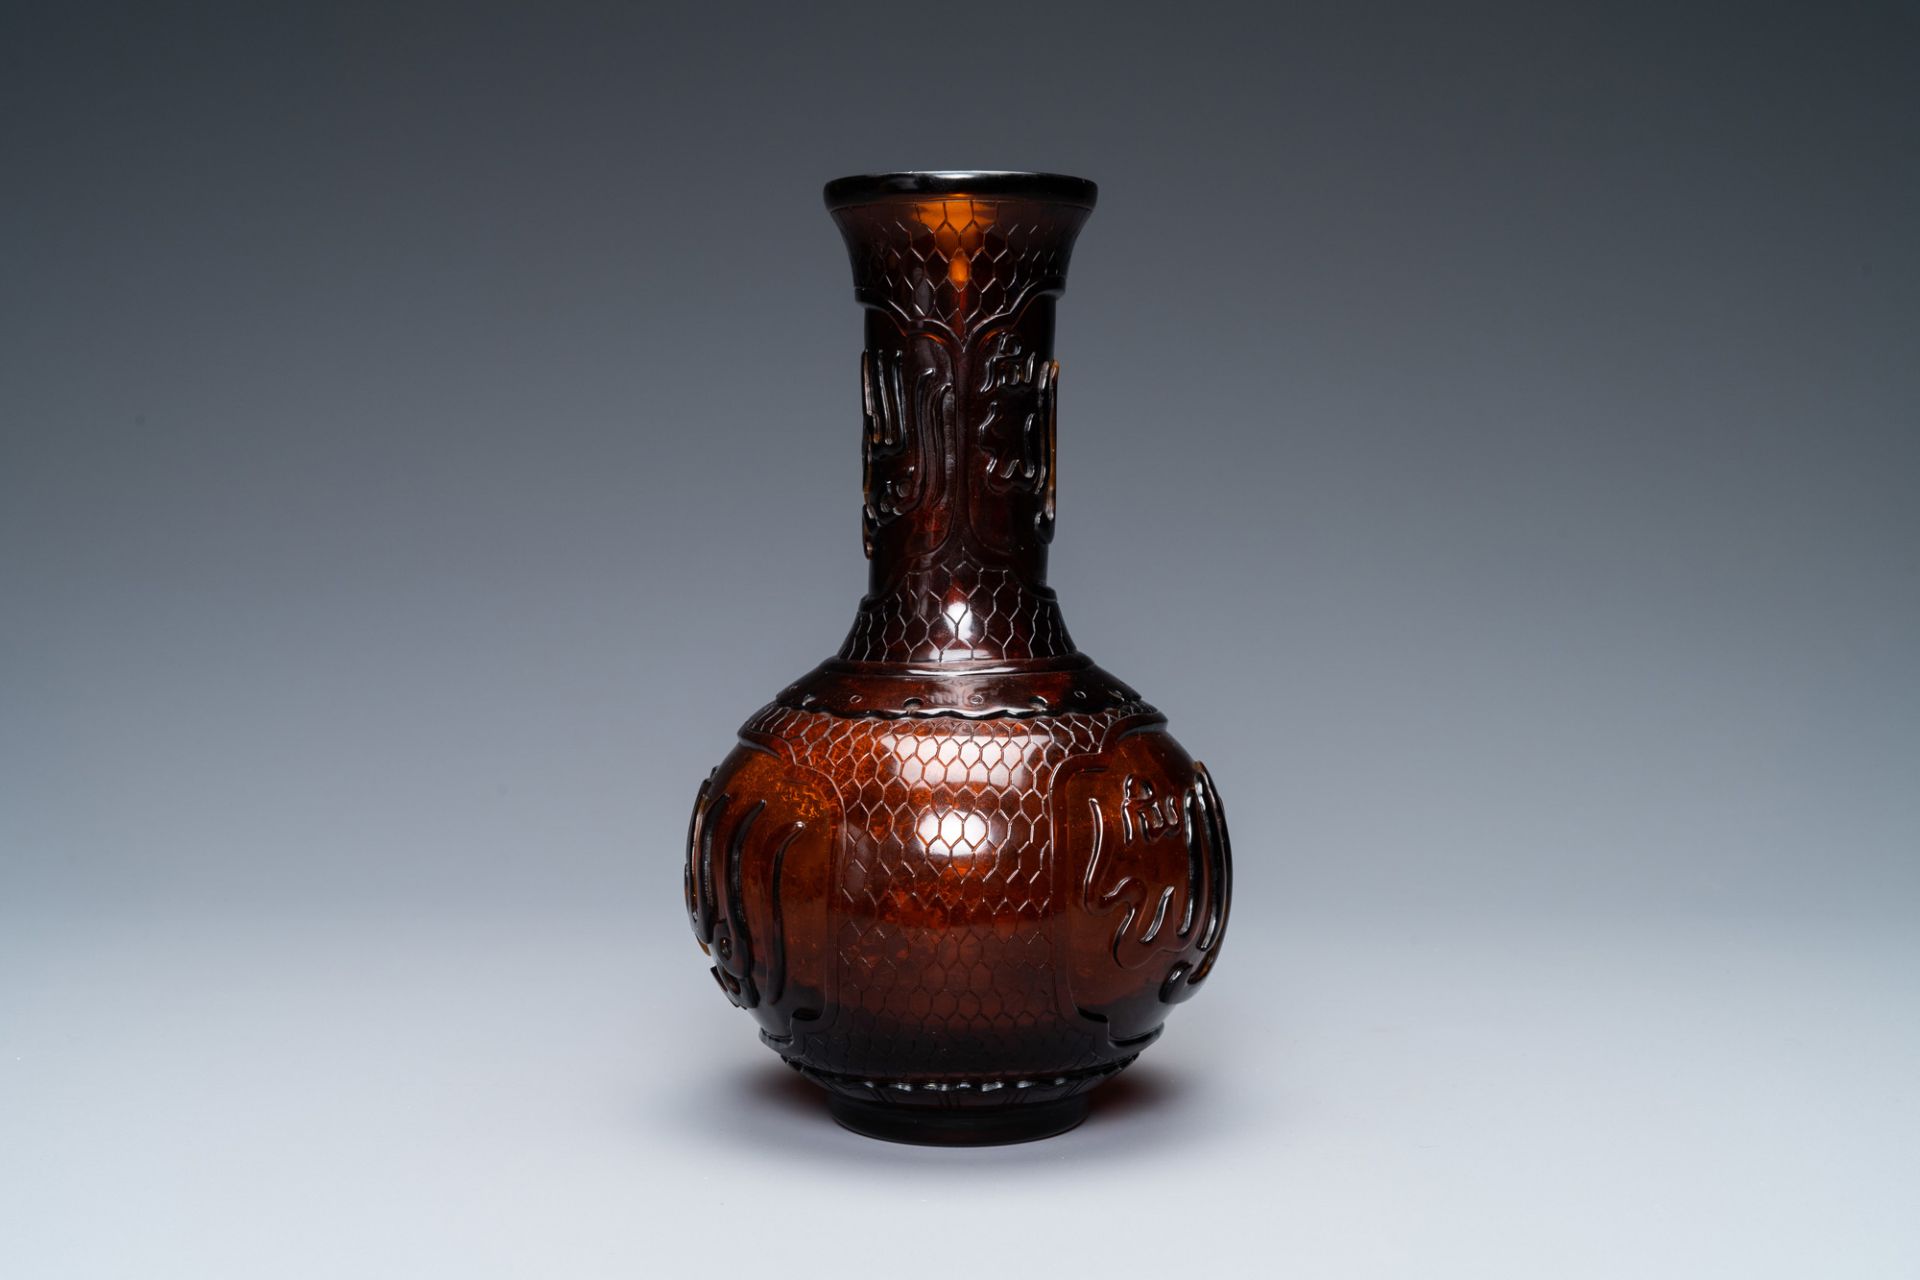 A Chinese Islamic market Beijing glass vase inscribed 'Allah' and 'Muhammad the Prophet', 18/19th C. - Image 8 of 10